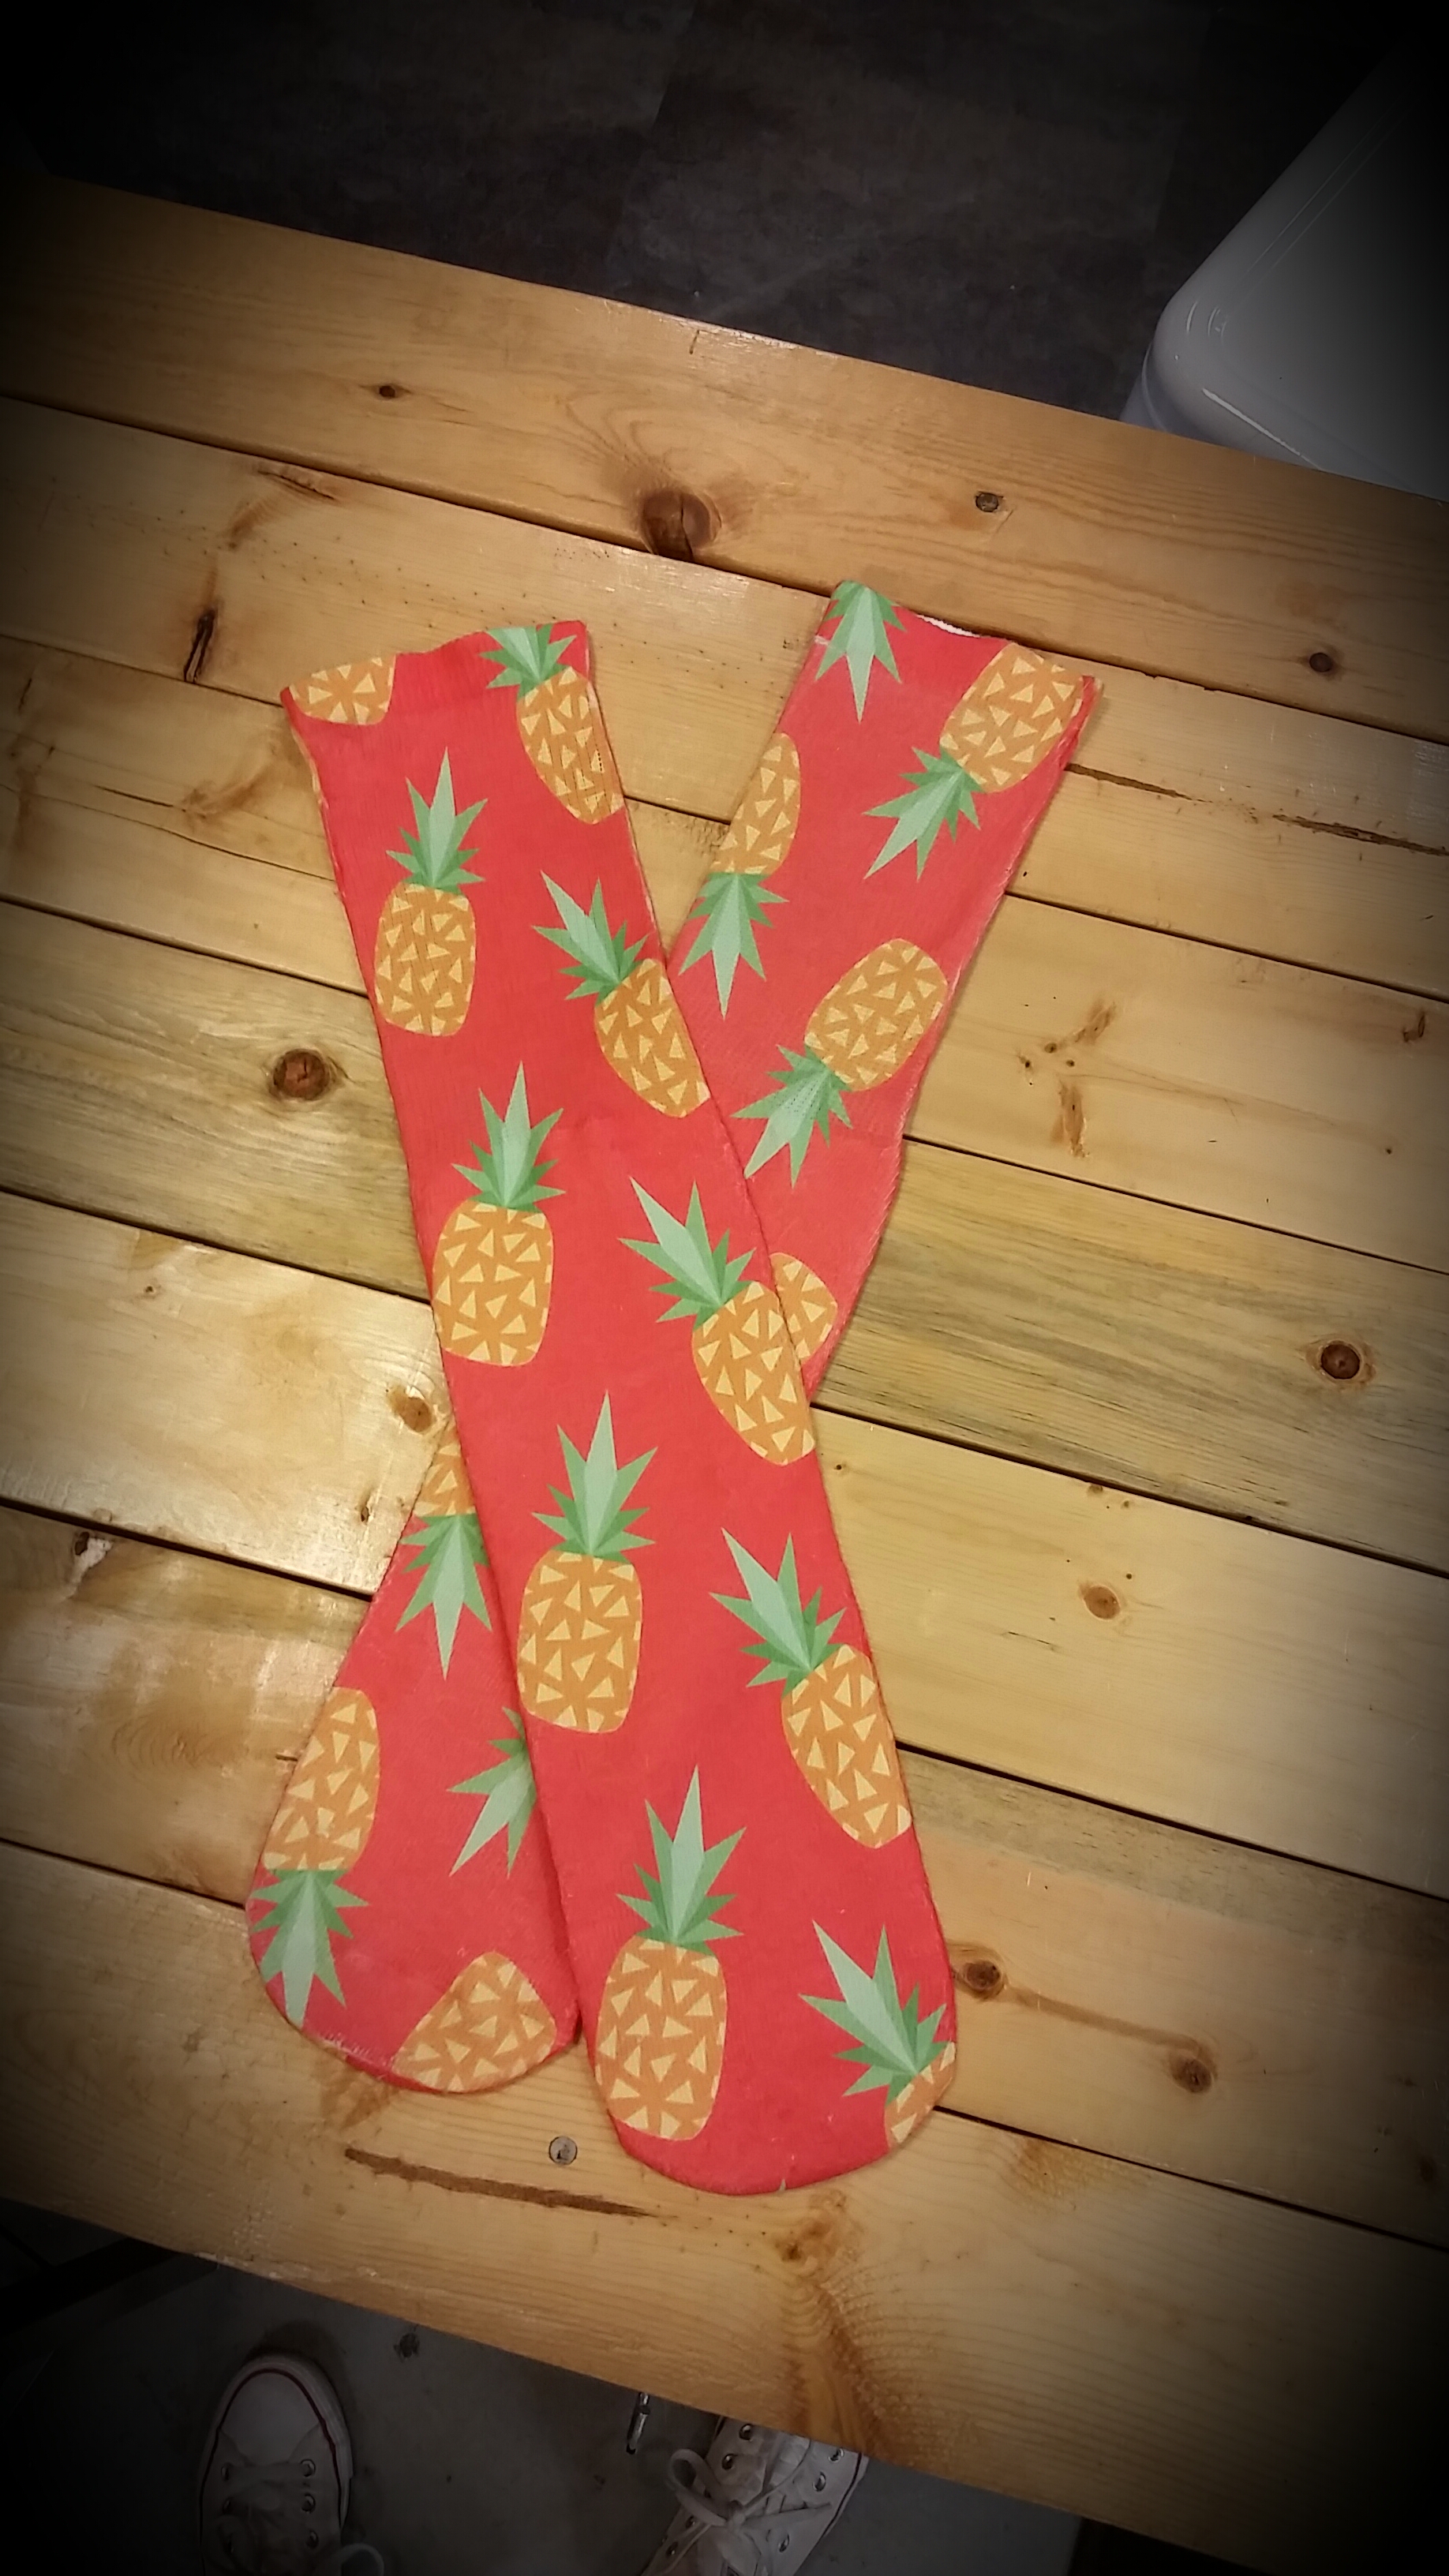 Pineapple Socks made with sublimation printing